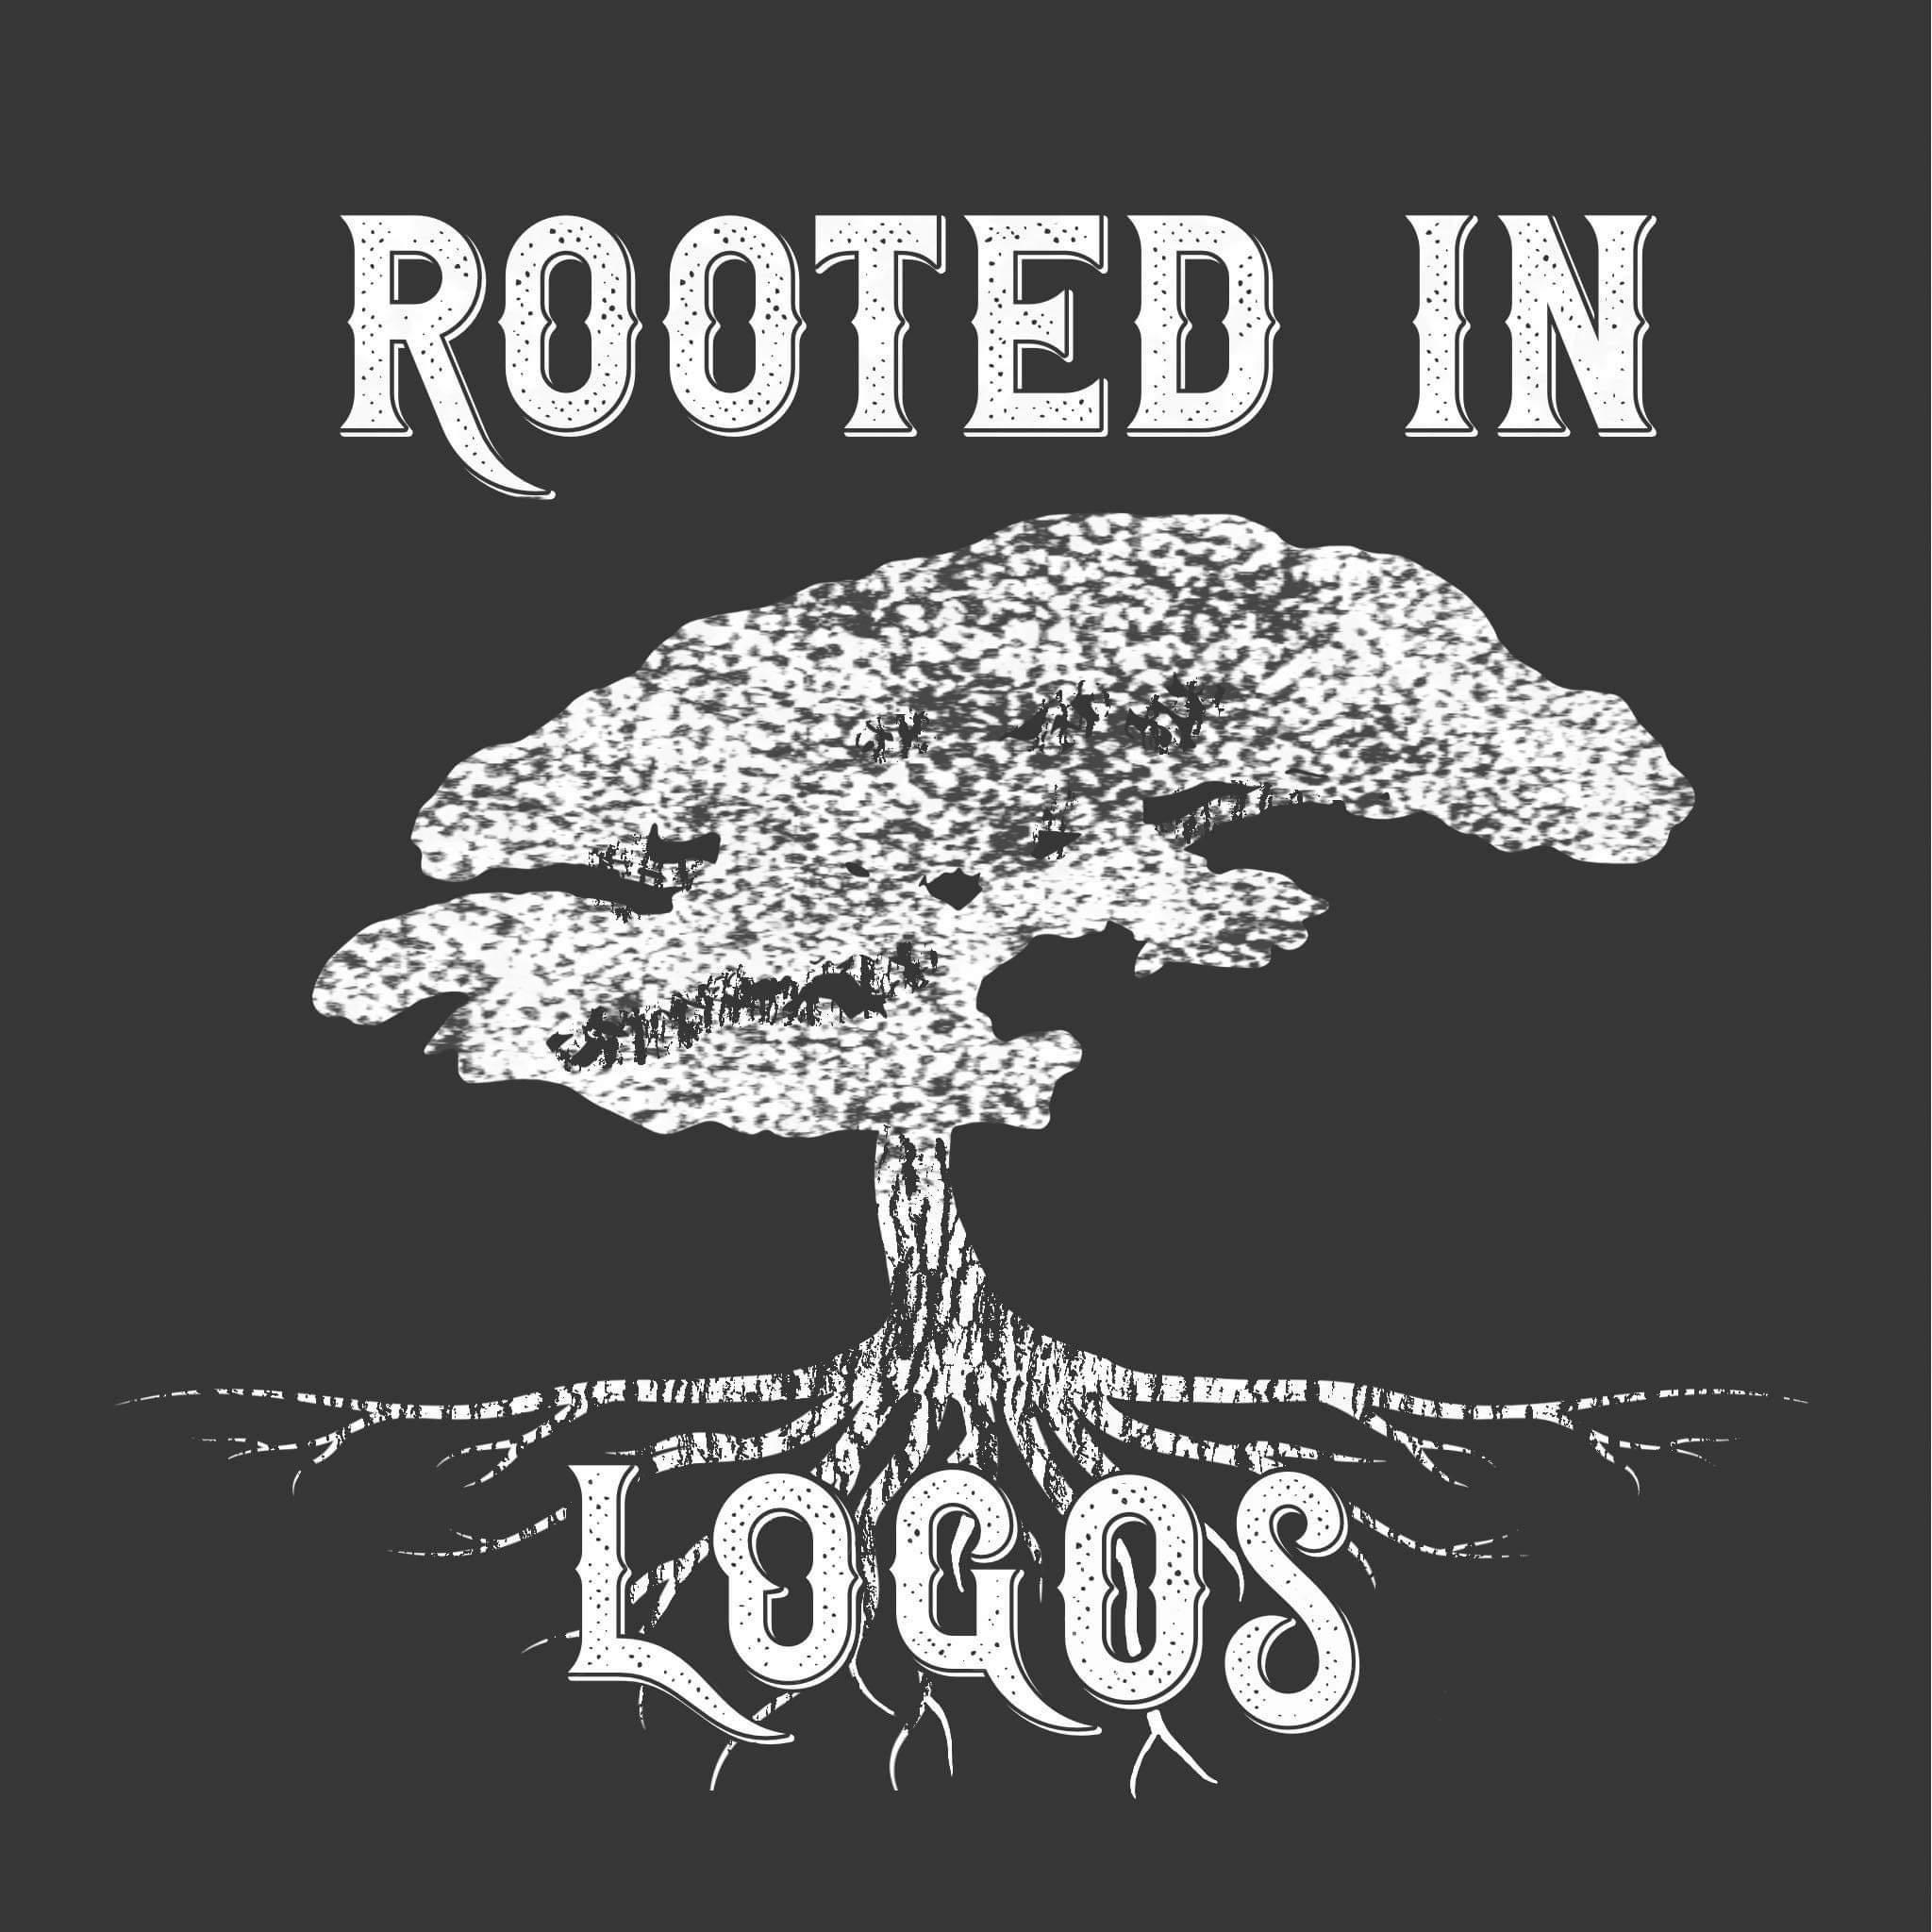 Artwork for Rooted in Logos